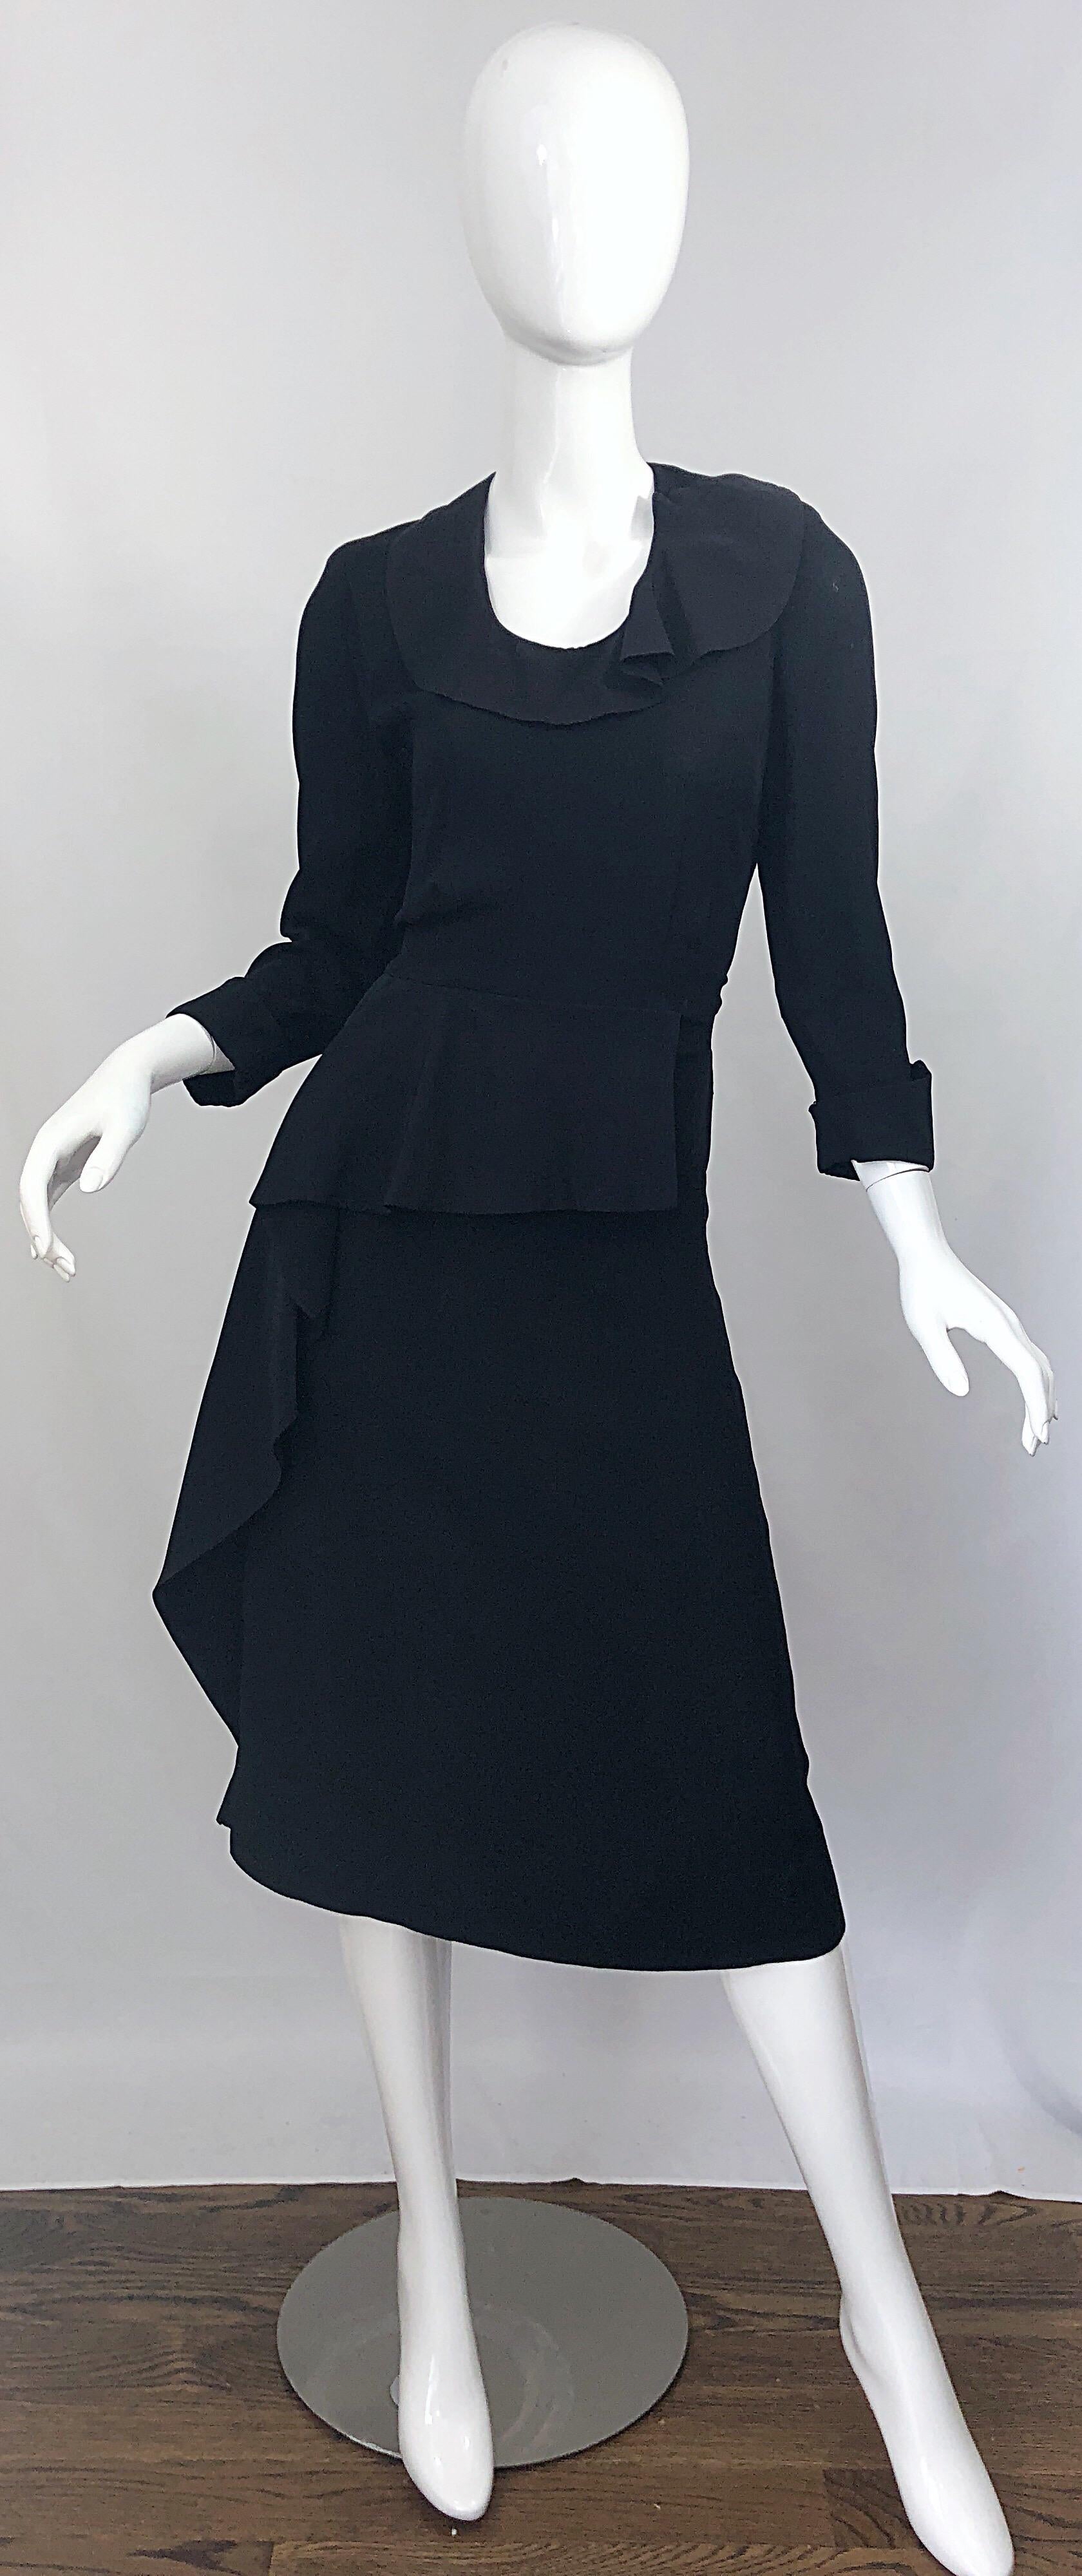 Chic 1940s black crepe long sleeve vintage 40s asymmetrical peplum dress! The perfect little black dress that exudes class and style. Flattering side peplum detail, with ruffle at waist and collar. Metal zipper up the side. Couture quality, with